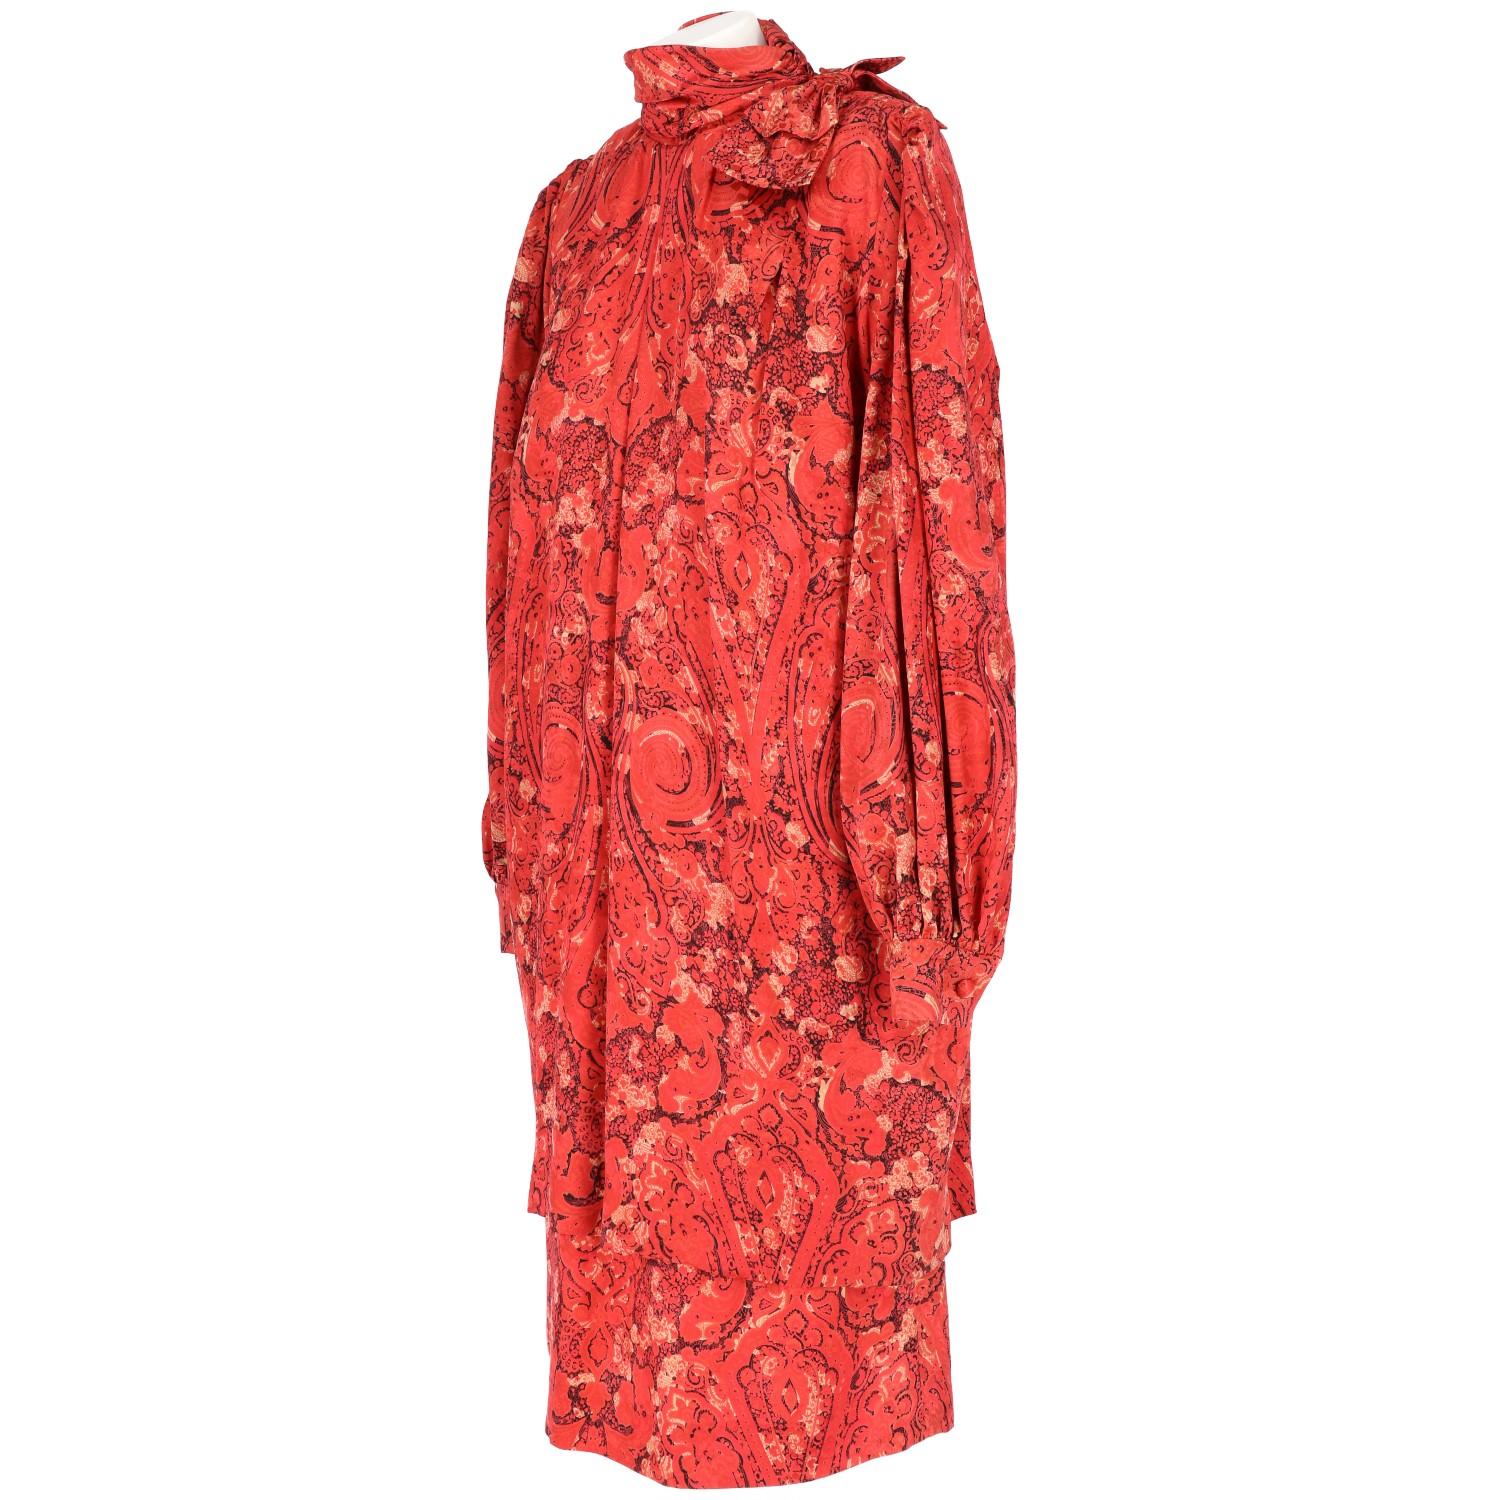 Beautiful Nina Ricci red silk high neck dress. It features a funnel neck with a decorative bow, an all-over print in black and beige colors, ruched detail, loose fit, pleated details, bell sleeves, button cuffs, a mid-length and a rear zip